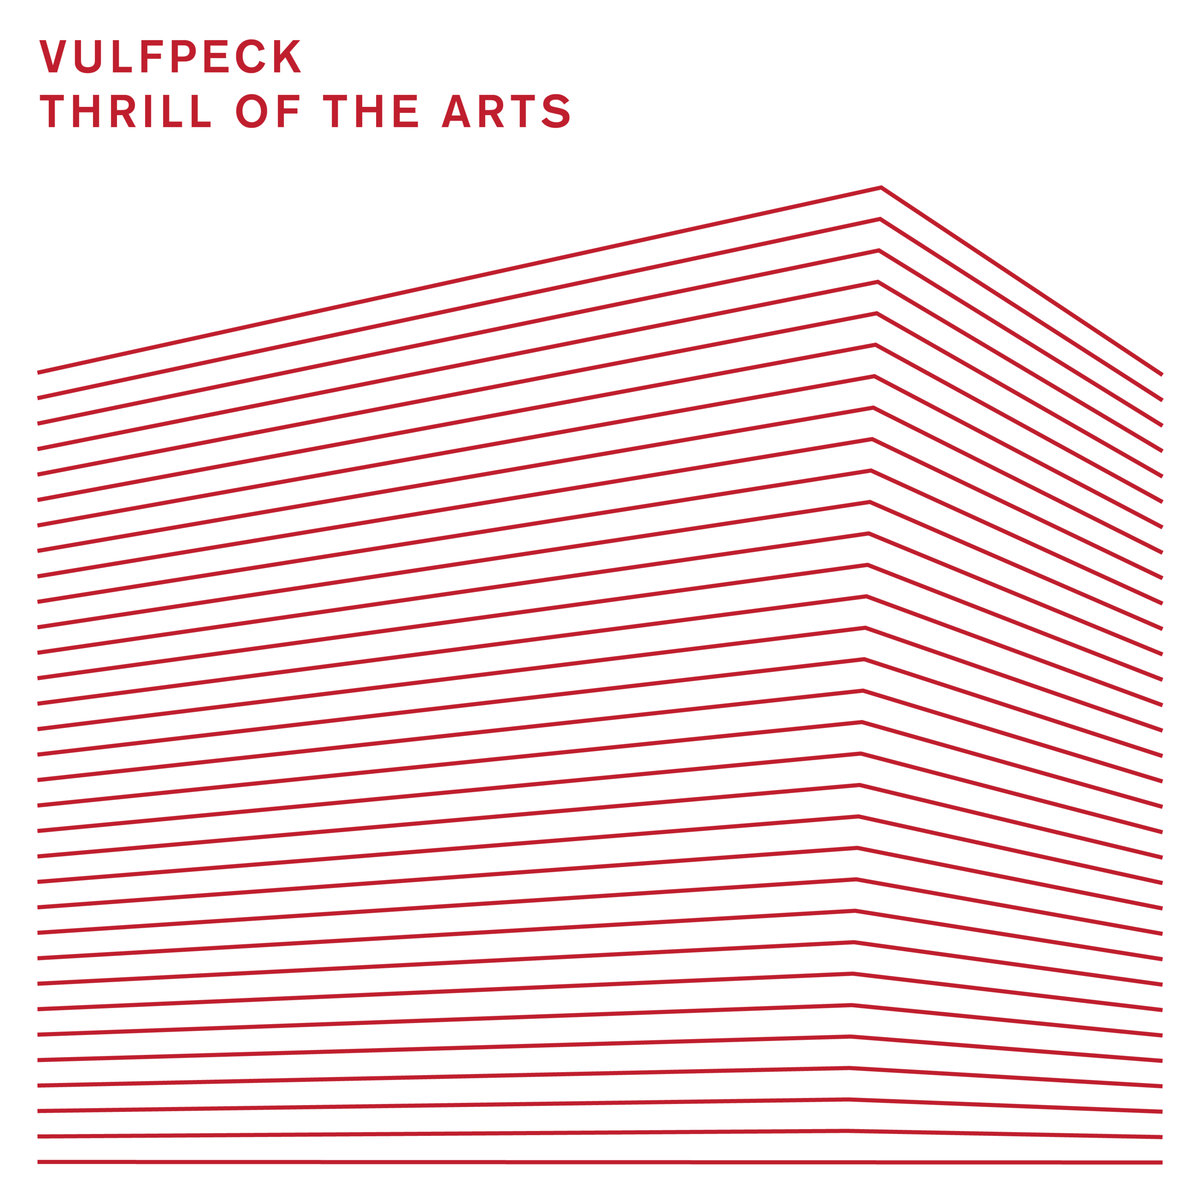 The album cover for Vulfpeck's Thrill of the Arts